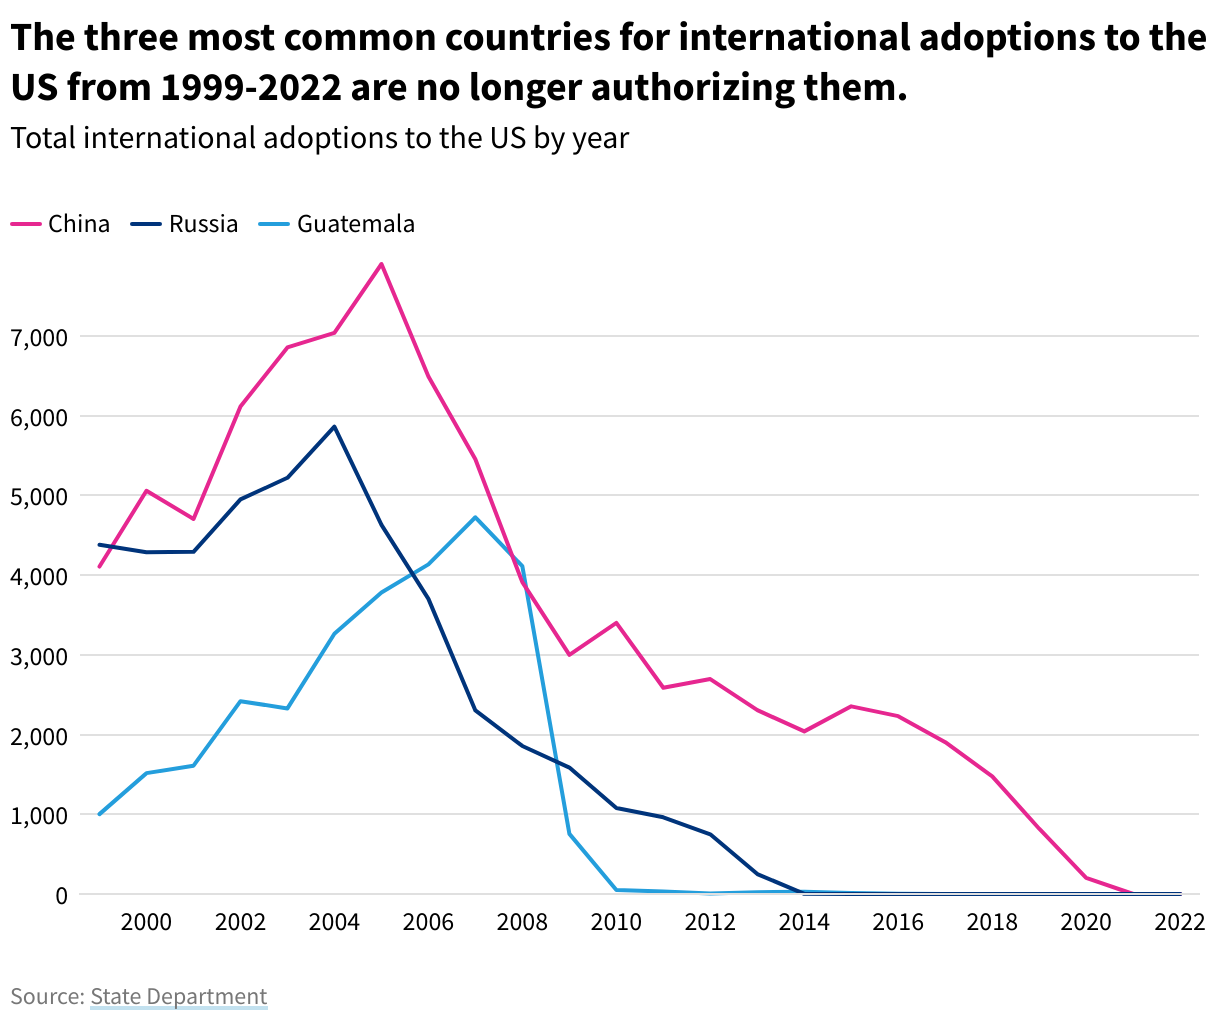 A line chart showing the decline in international adoptions from China, Russia, and Guatemala to the US.